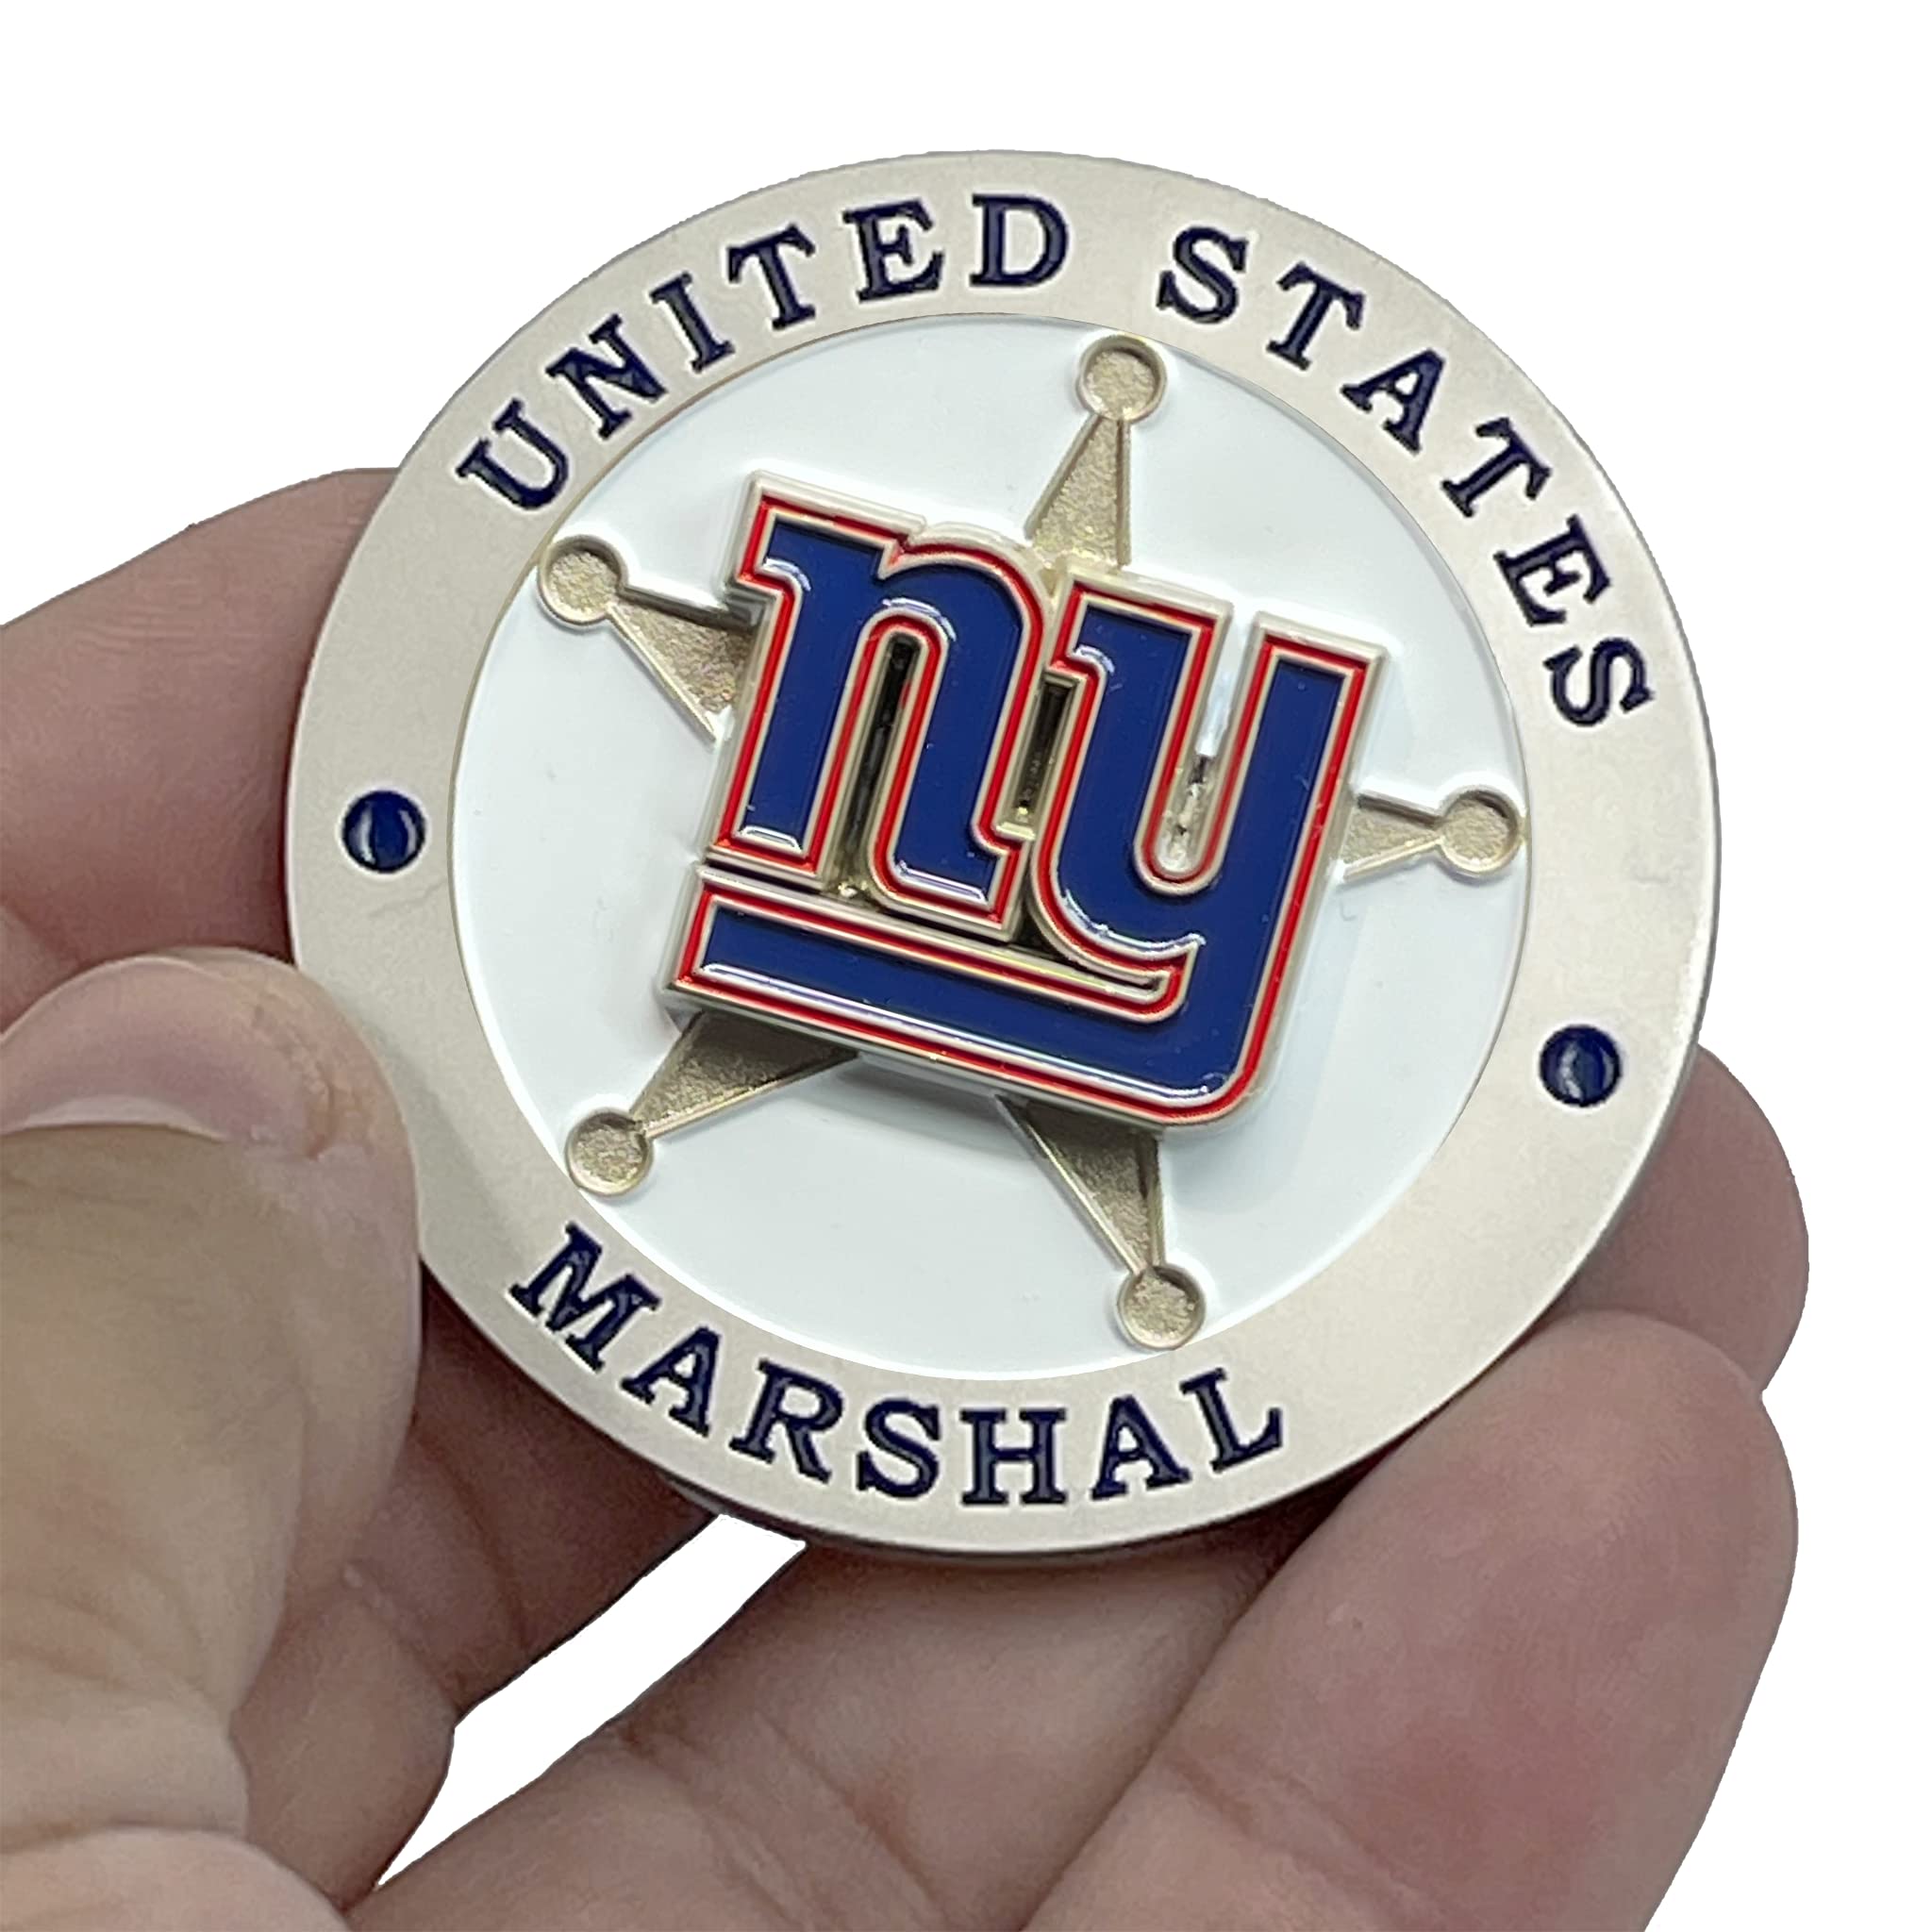 BL10-001 New York New Jersey Football United States NY US Marshal Challenge Coin Southwest District NJ